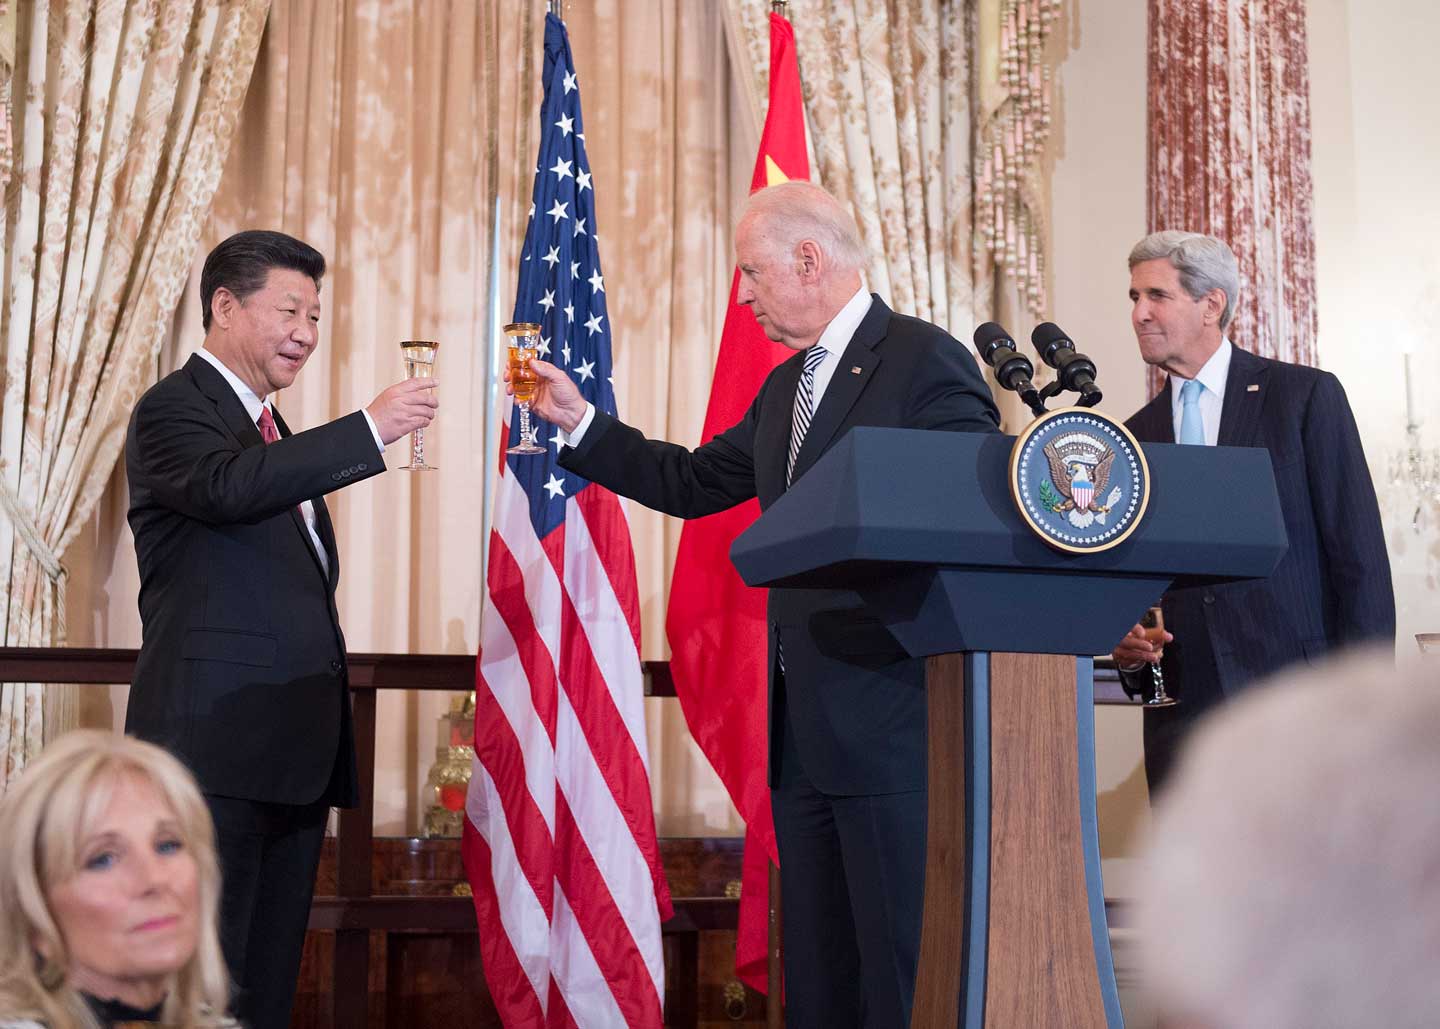 Vice President Biden Raises a Toast in Honor of Chinese President Xi at a State Luncheon at the State Department